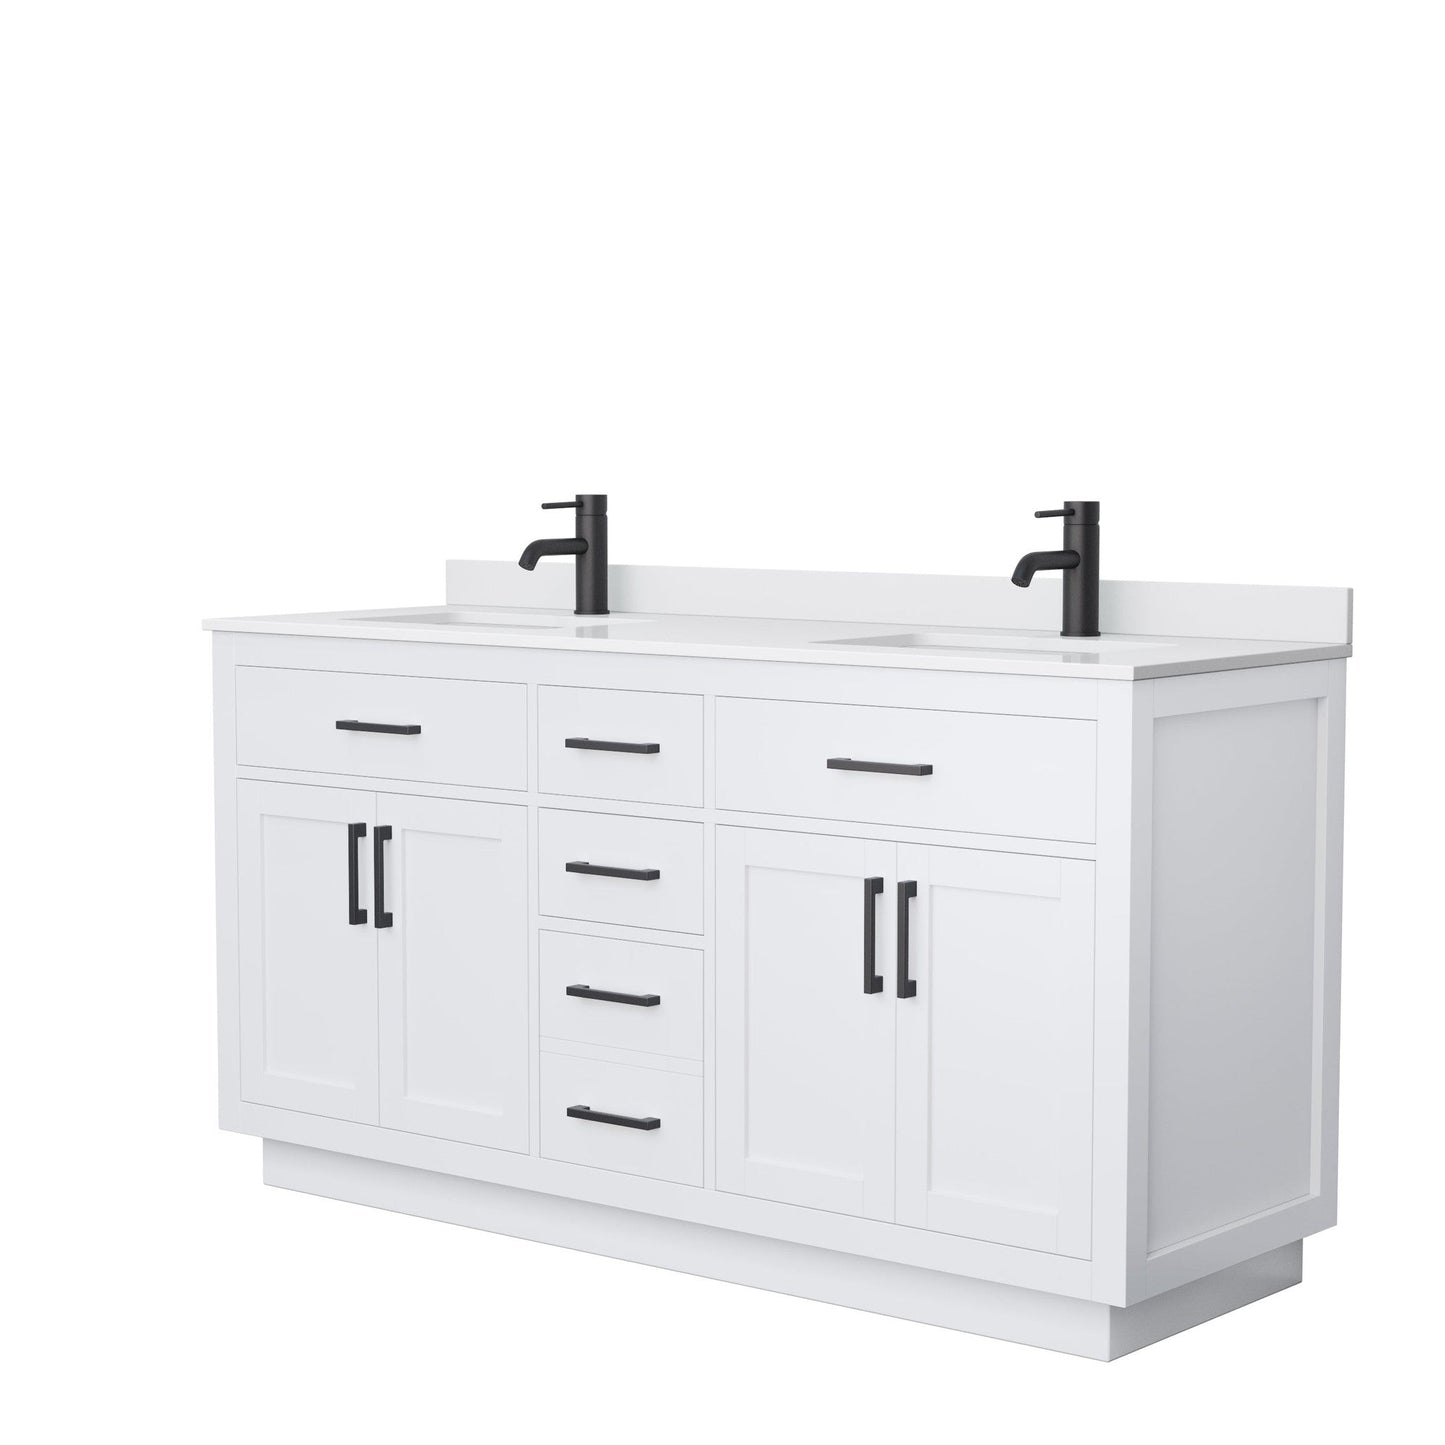 Beckett 66" Double Bathroom Vanity With Toe Kick in White, White Cultured Marble Countertop, Undermount Square Sinks, Matte Black Trim